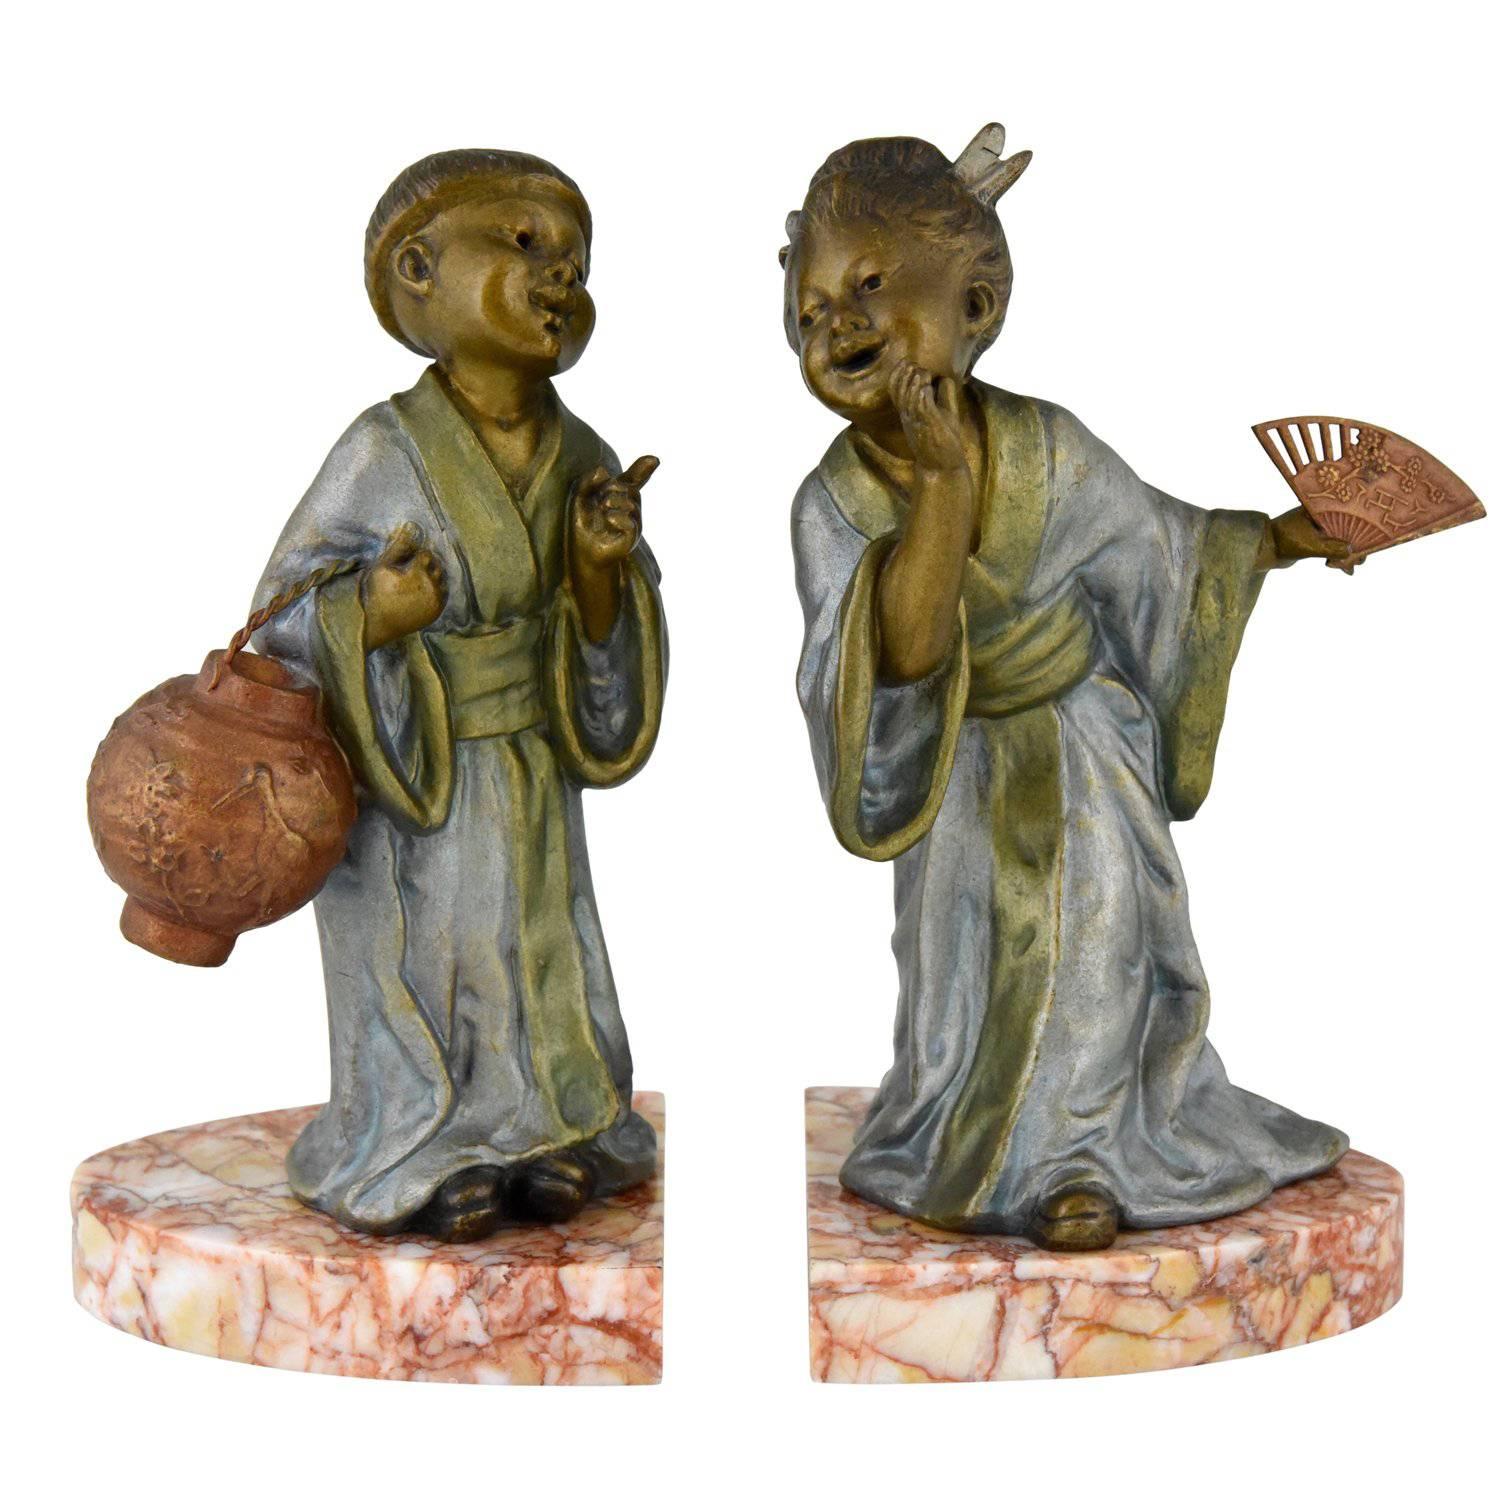 Art Deco Bookends with Chinese Children, Geo Maxim, 1930 France